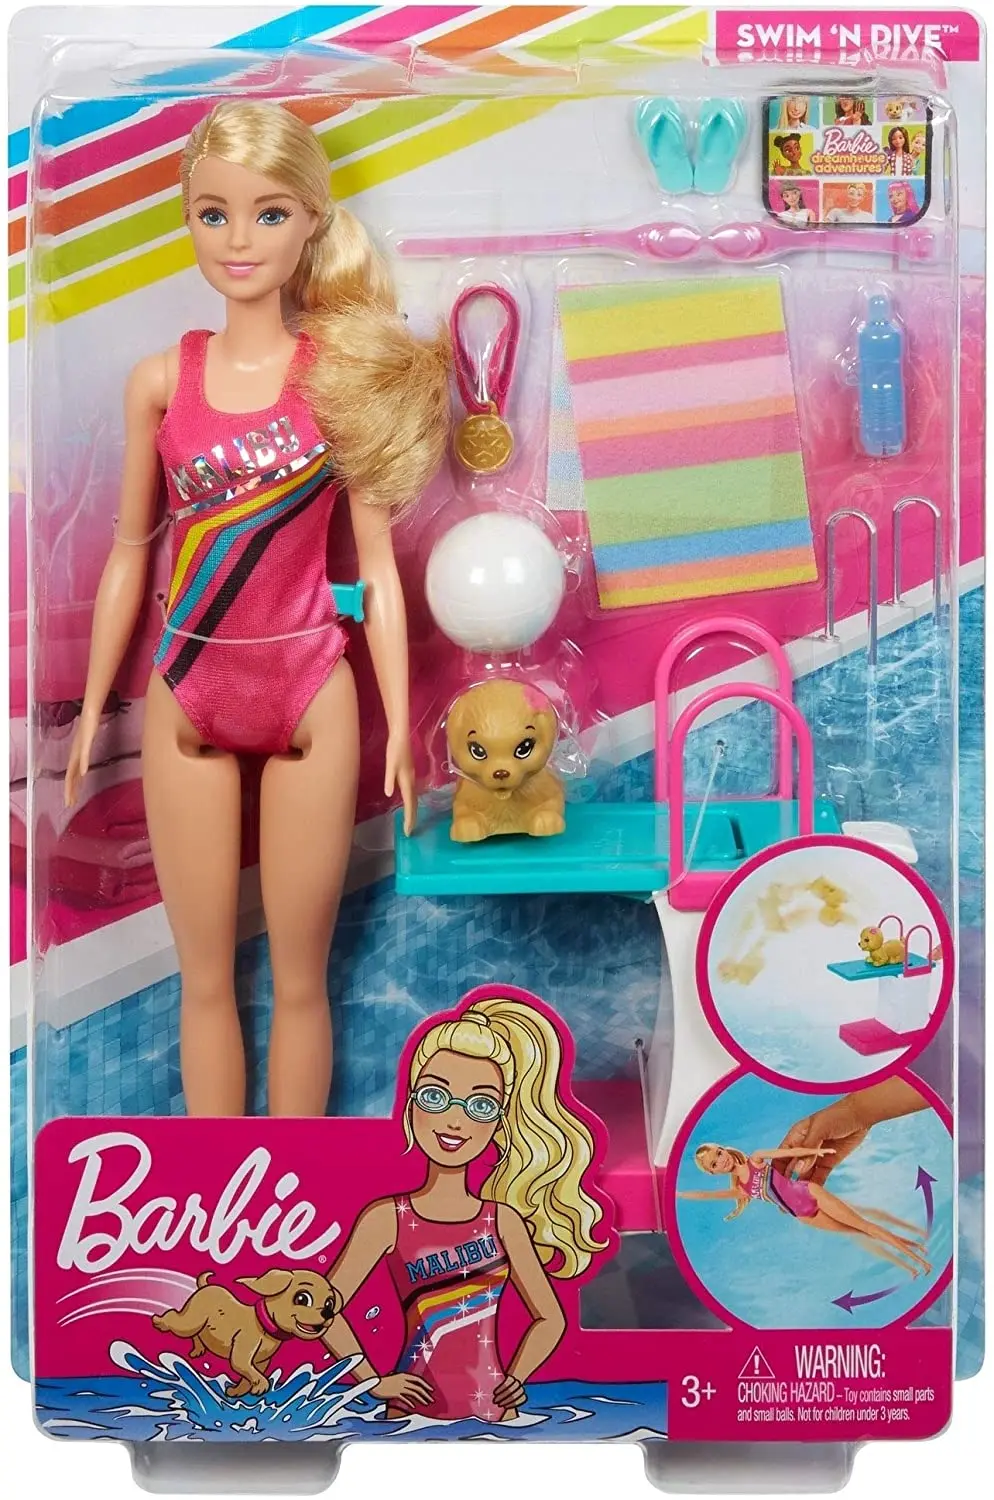 

Barbie Dreamhouse Adventures Swim'n Dive Doll, in Swimwear, with Swimming Feature, Diving Board and Puppy, 3 to 10 Year Olds